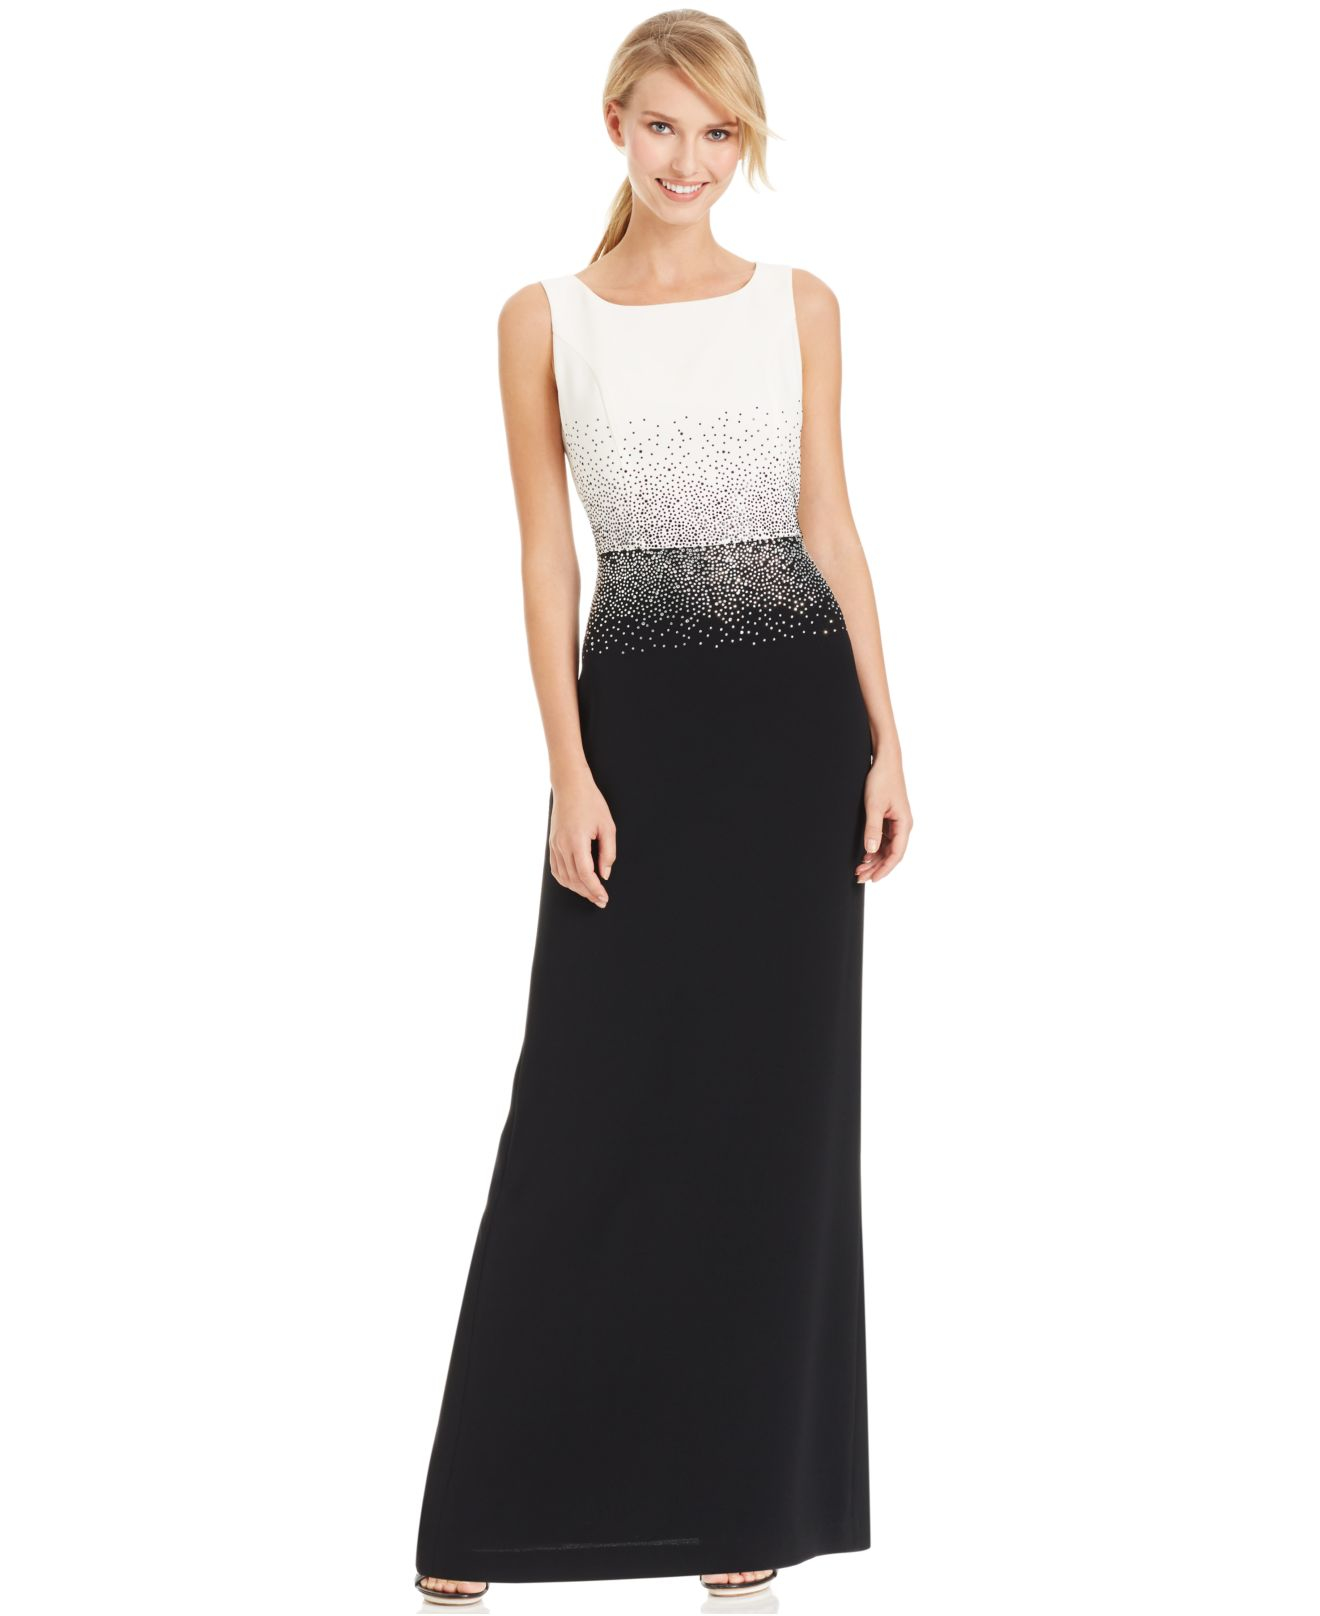 Calvin Klein Studded Colorblocked Evening Dress in Black | Lyst